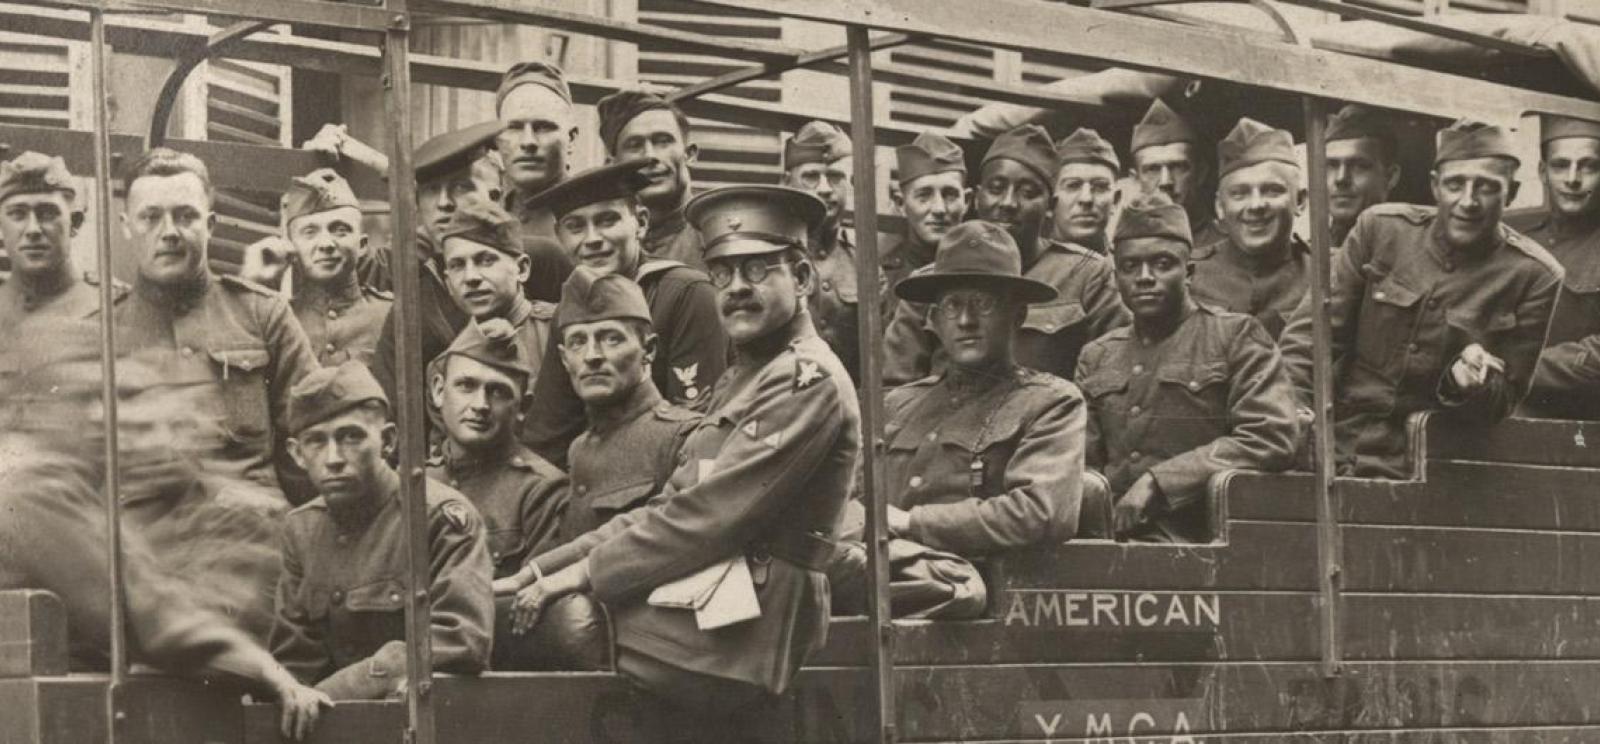 Black and white photo of a large group of men in military uniform seated in a tour bus in a French town.